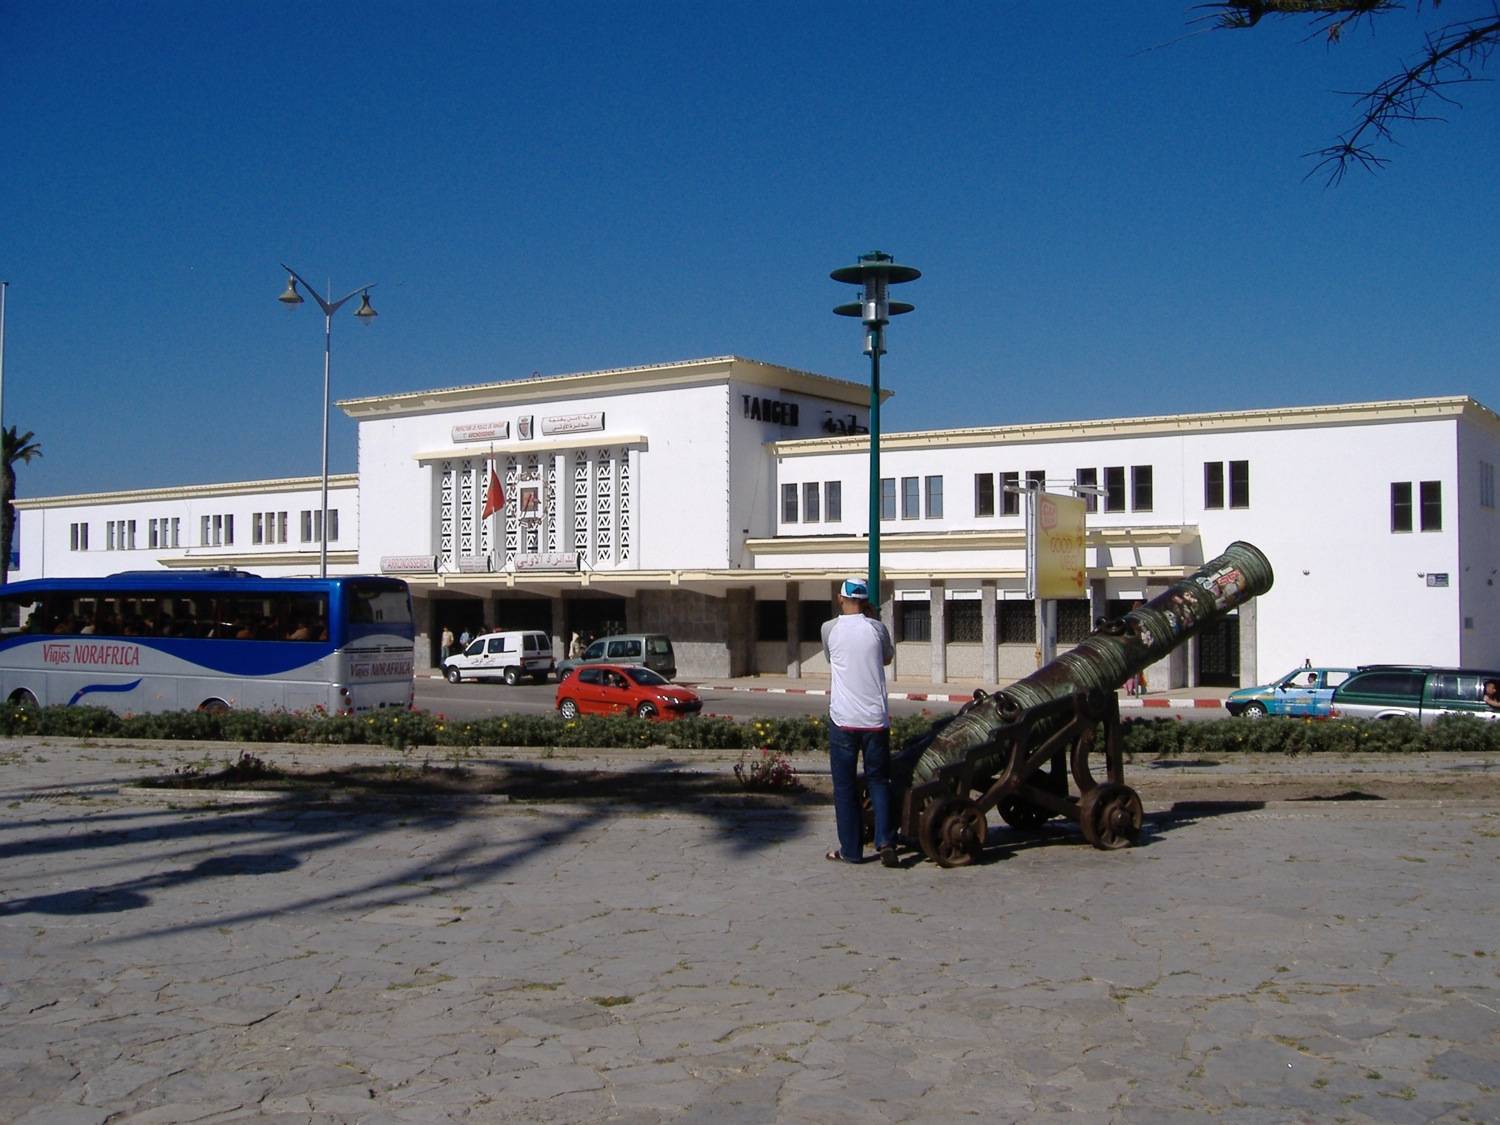 View of the station from across the  square